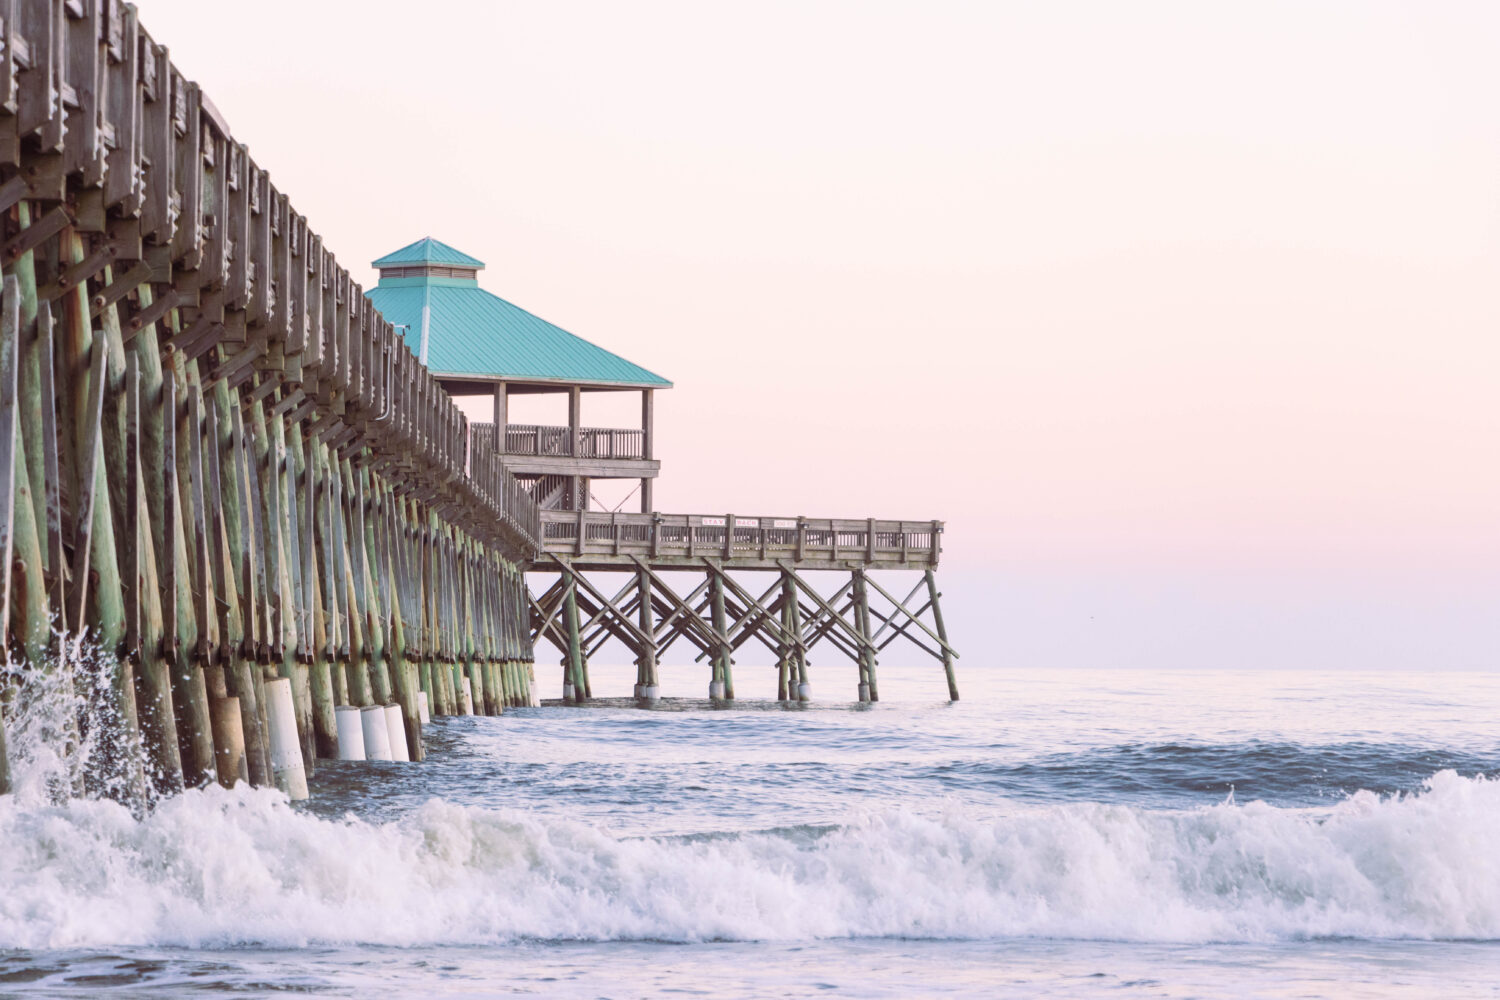 Why you should stay at Folly Beach near Charleston - The pier at dusk